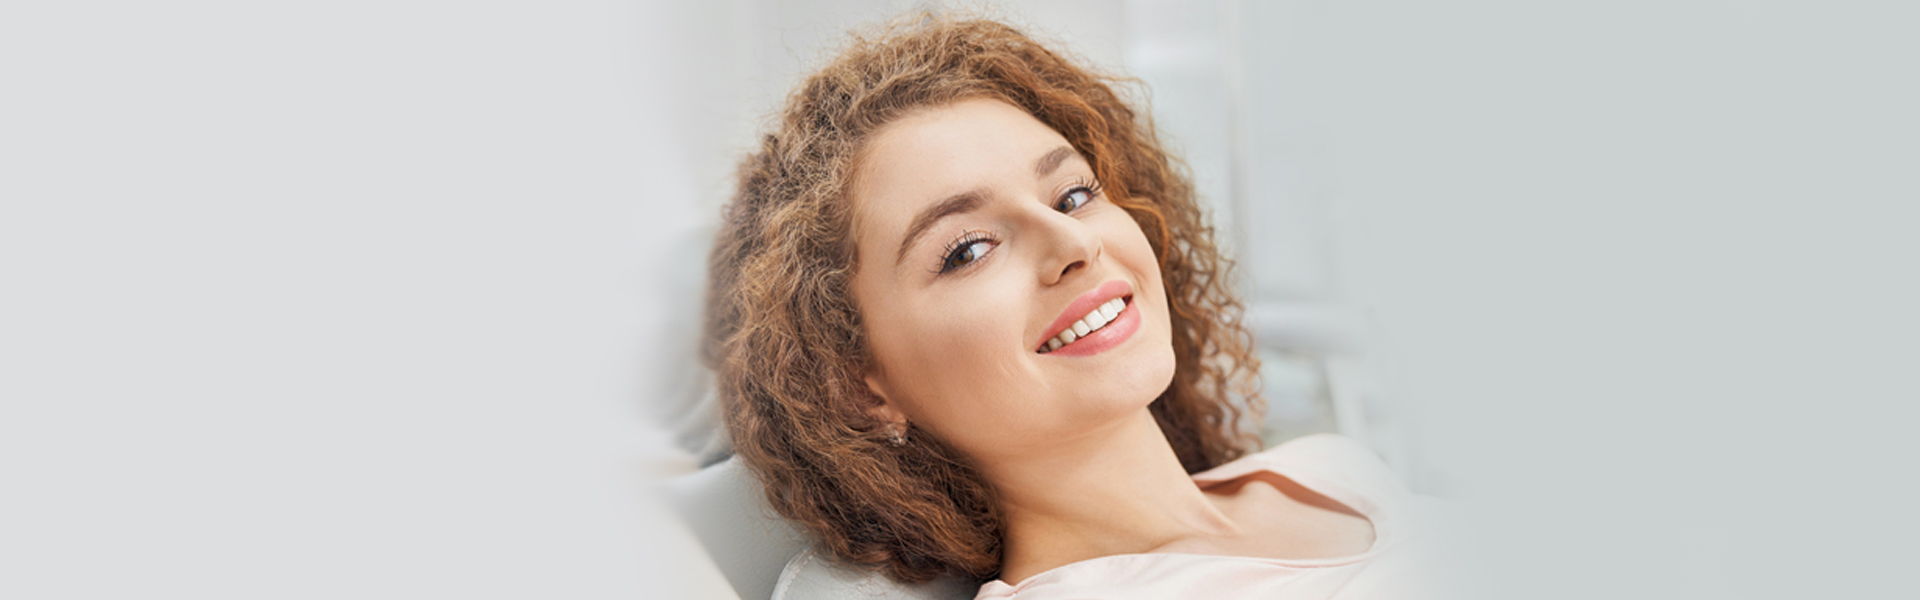 What Are Dental Crowns and How Effective Are They?